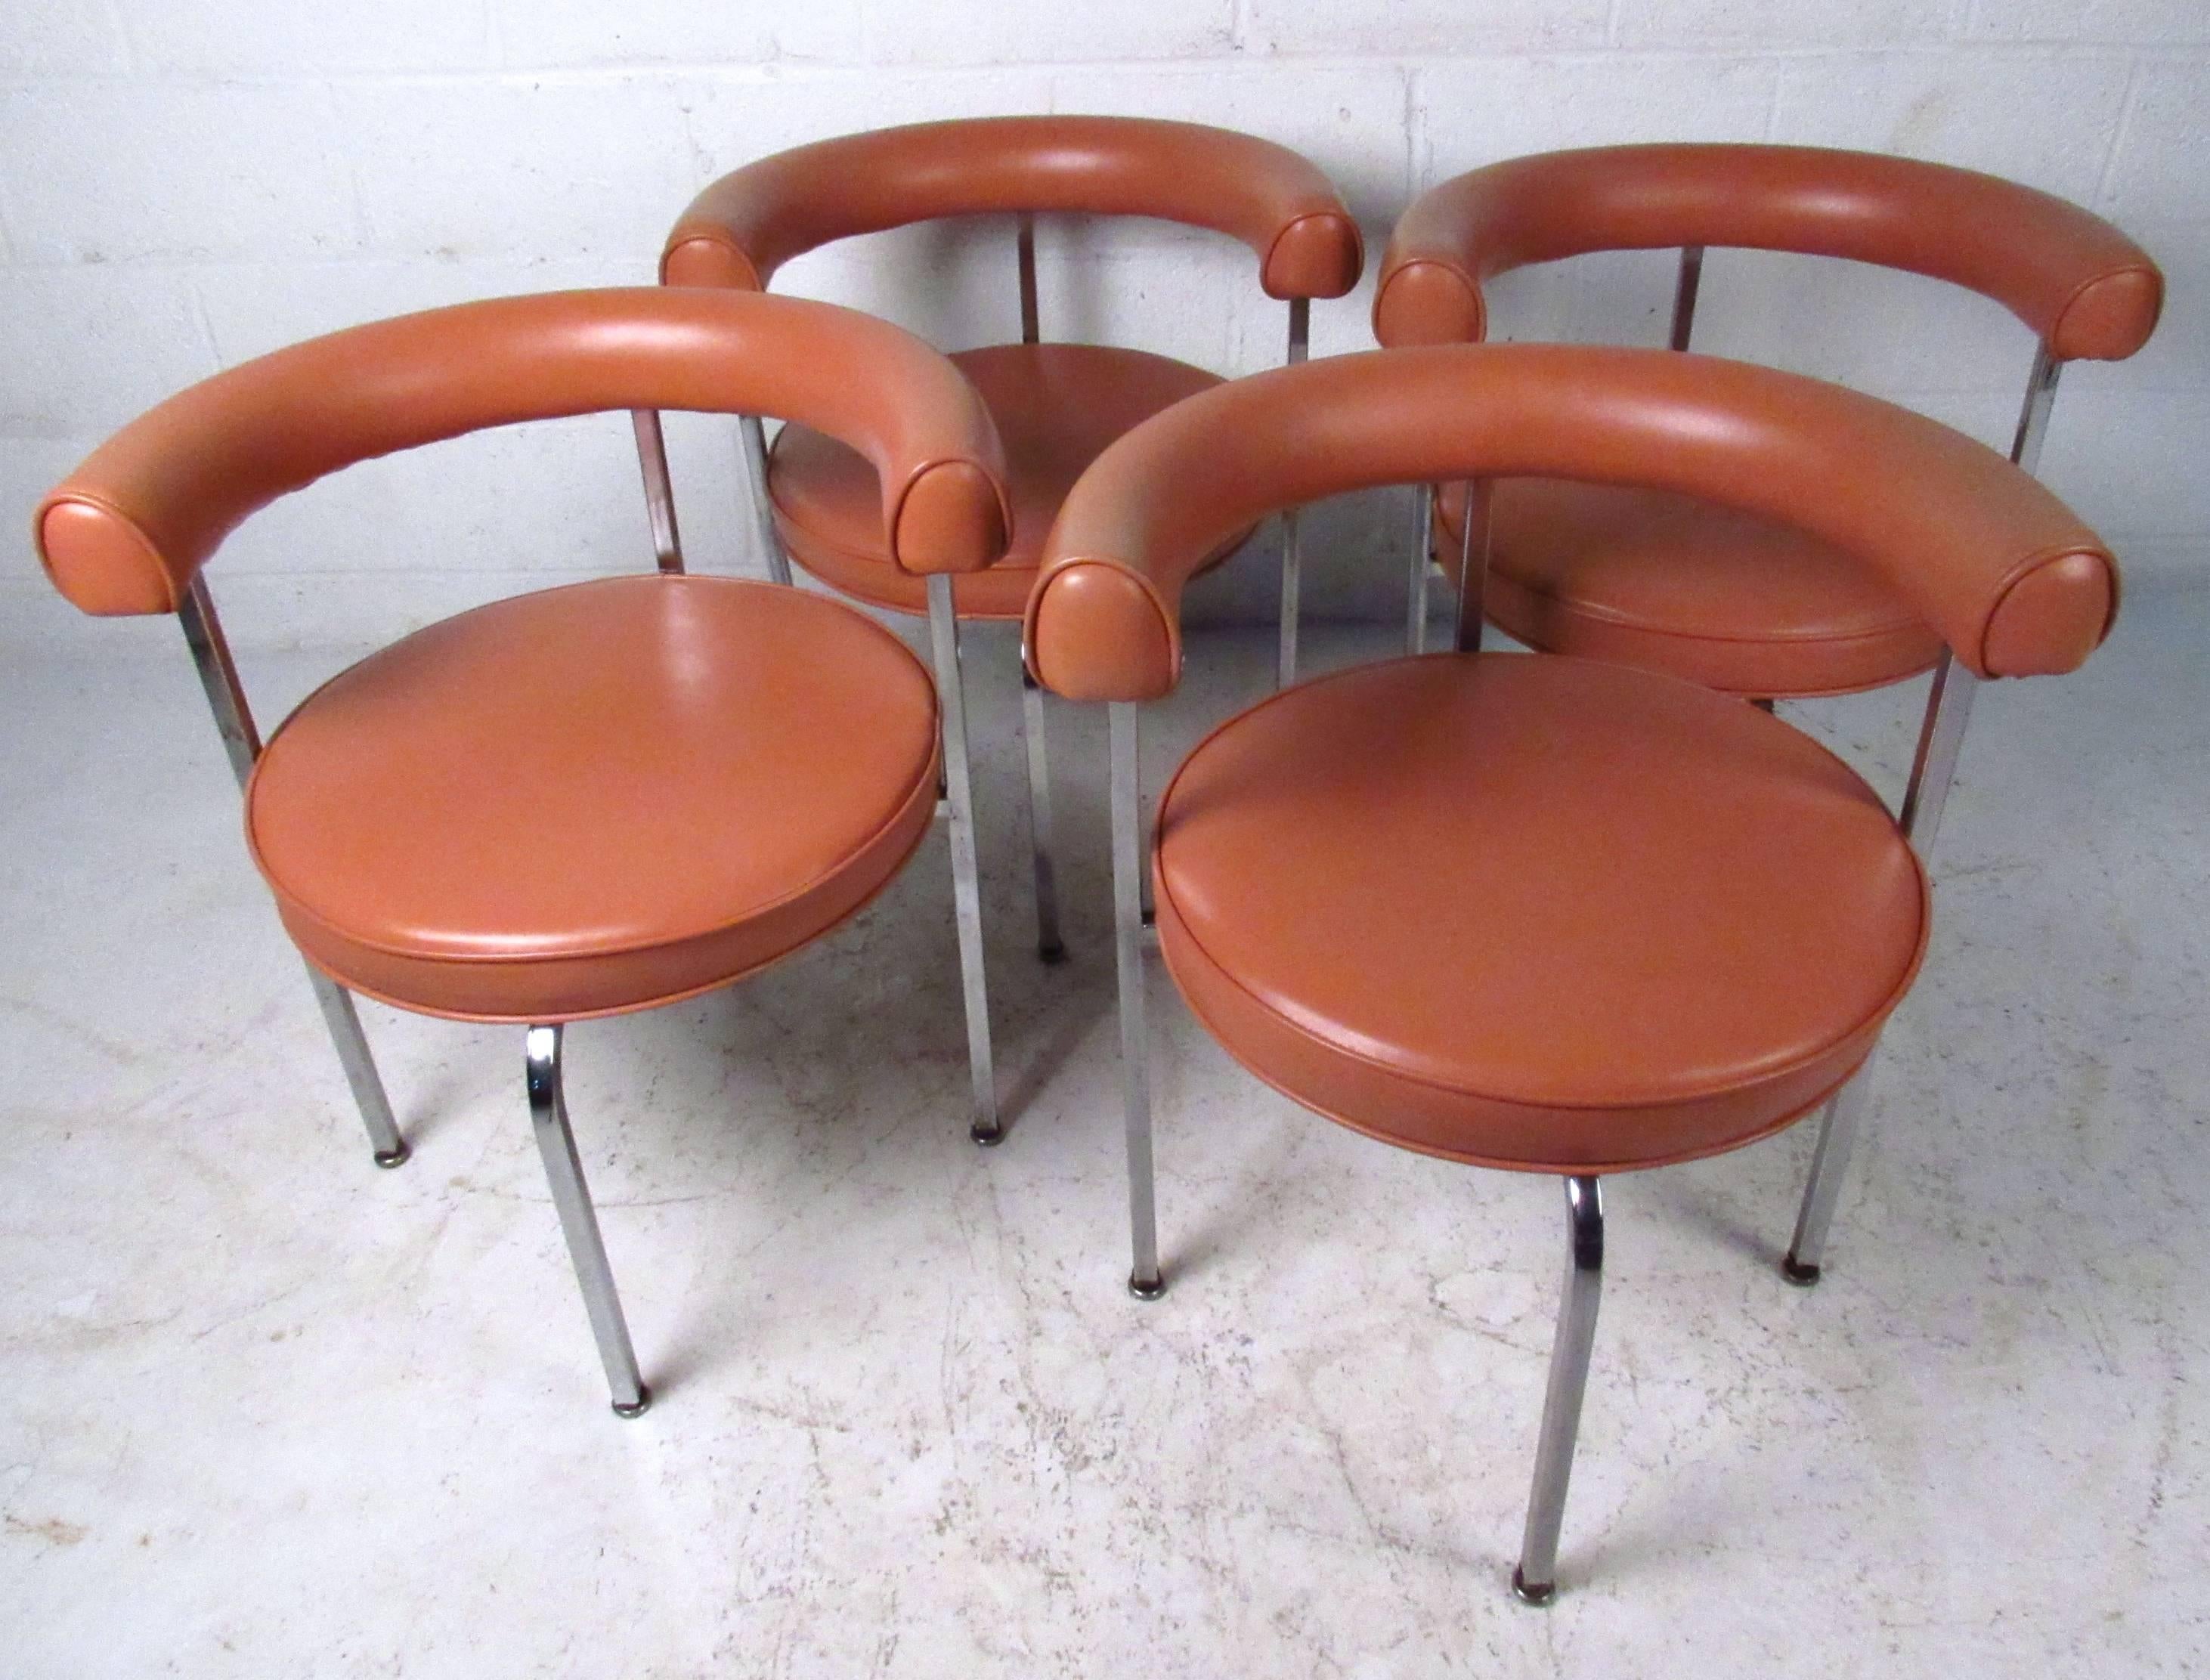 This set of four vintage chairs feature a unique style similar to the LC7 by Le Corbusier. Comfortable rounded seat backs and sturdy chrome frame make this a stylish addition to any interior, and great for occasional or dining use. Please confirm